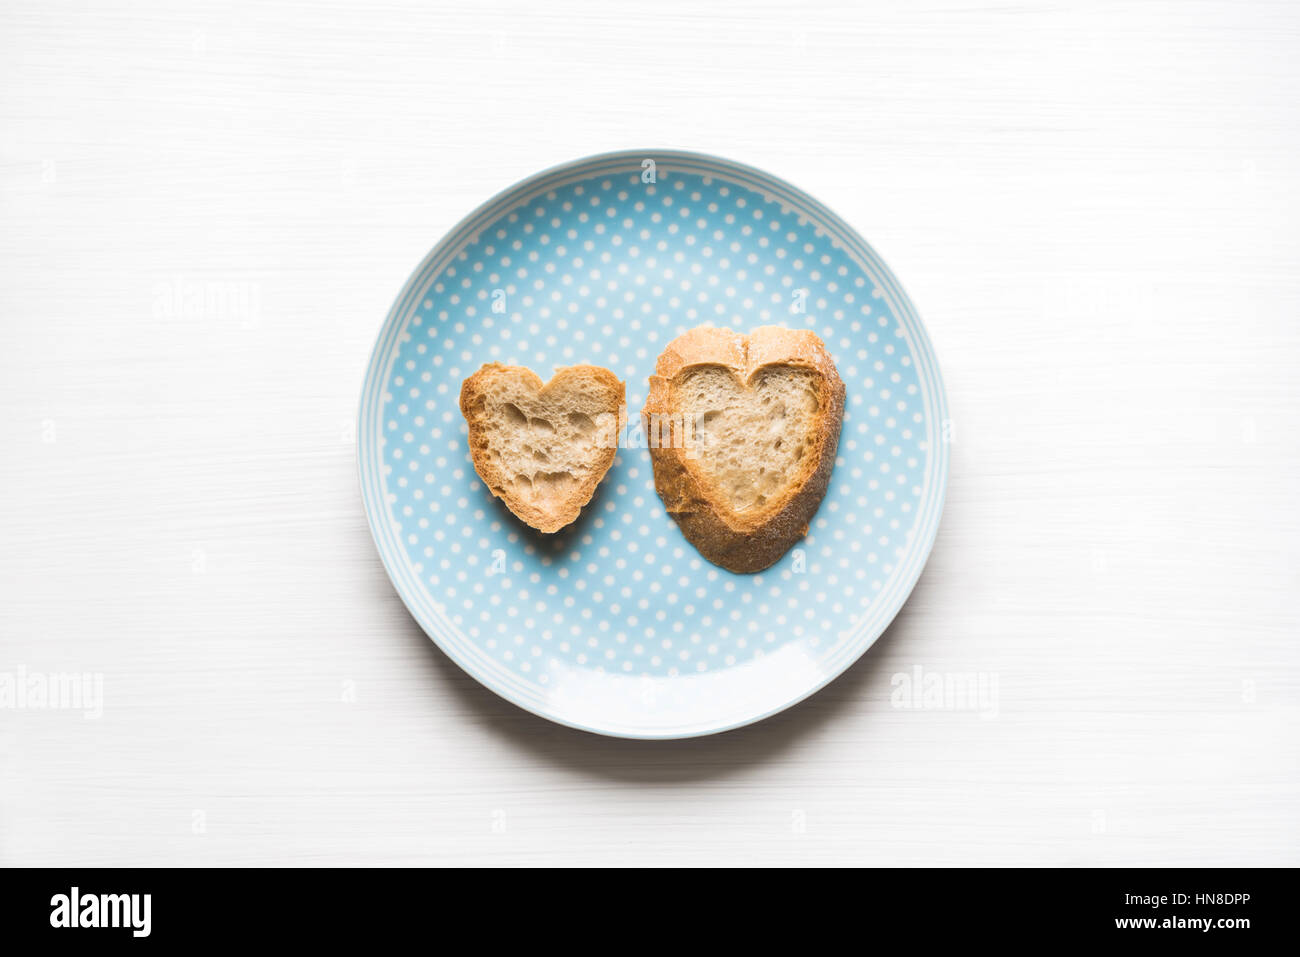 Top view of natural heart-shaped sliced bread on blue plate with white background. Love concept. Stock Photo